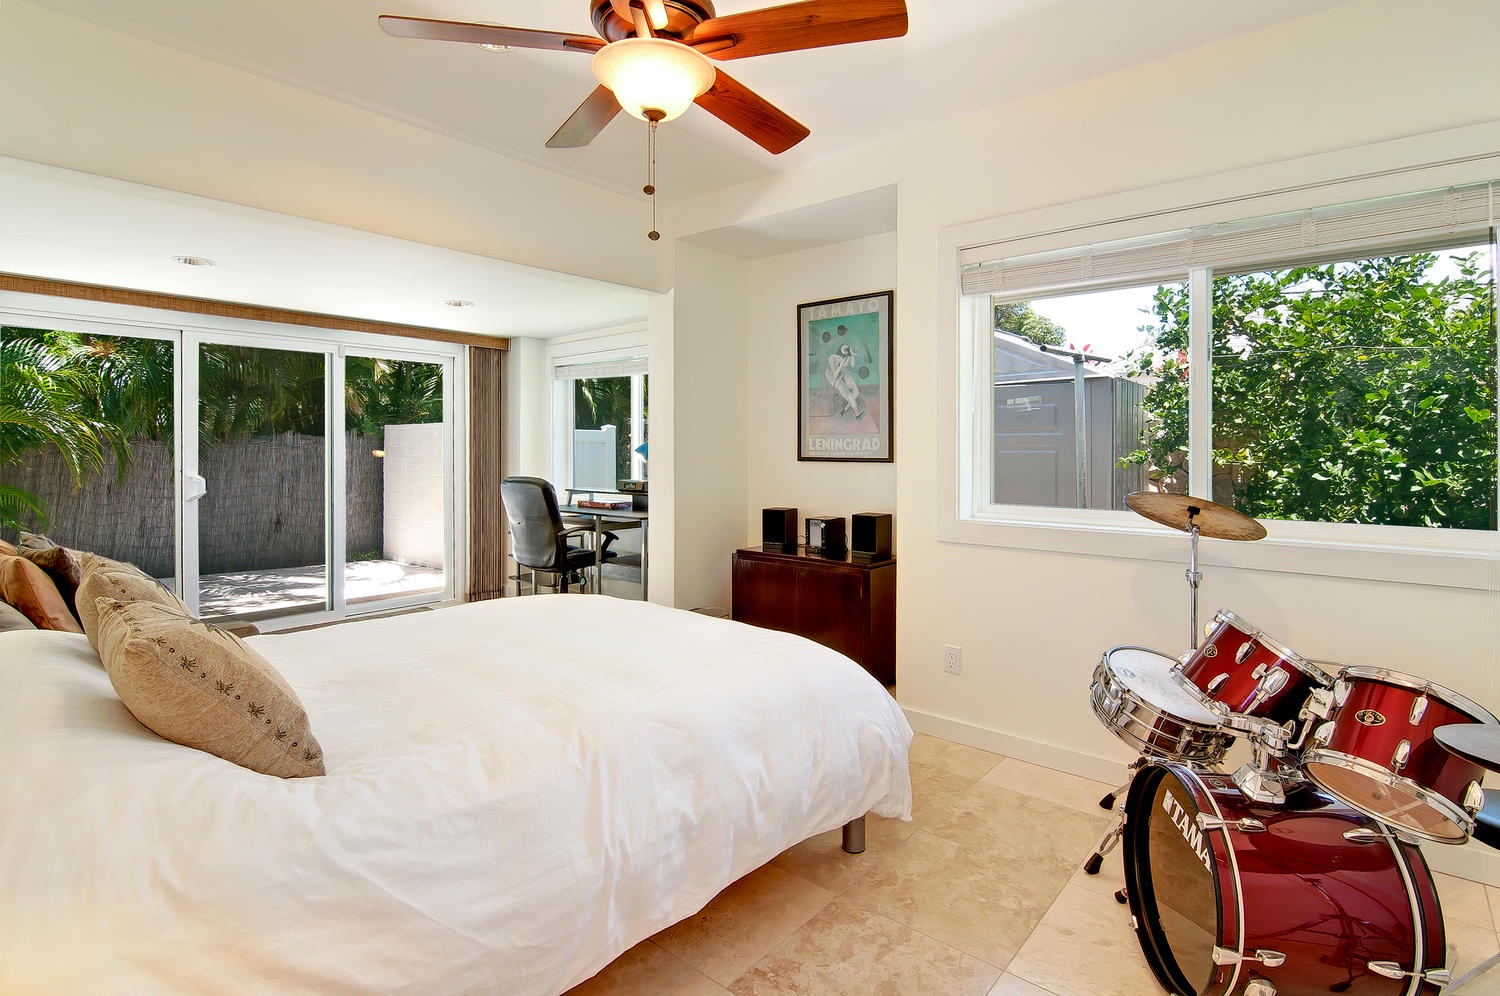 Honolulu Vacation Rentals, Kahala Lani - Bedroom Five - Sleeps Four. Queen bed, Sofa bed has been replaced with a twin day/trundle bed (queen), with its own lanai